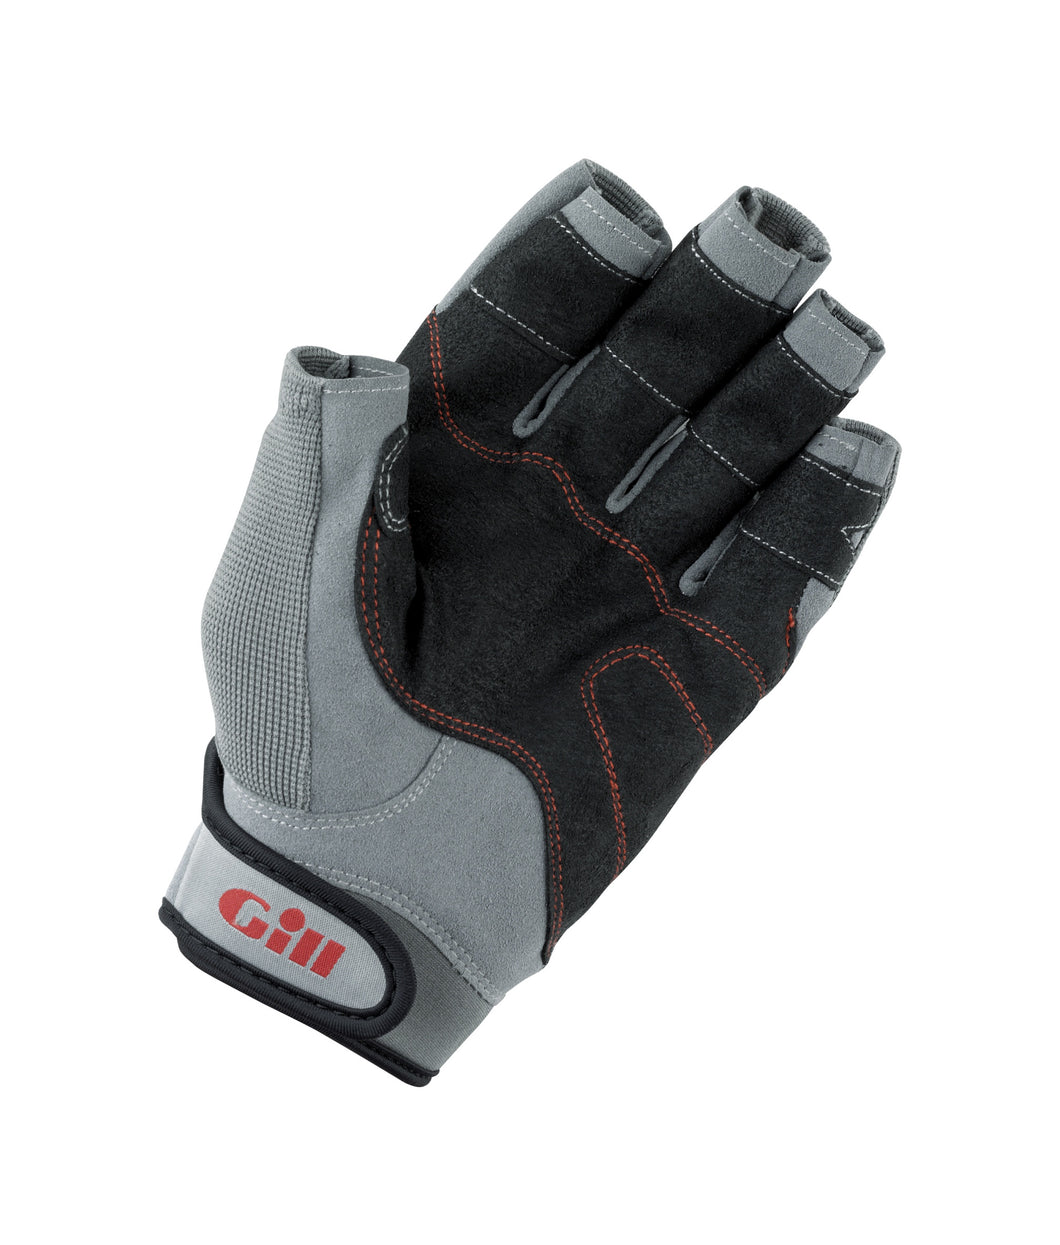 GILL DECKHAND SHORT FINGER  GLOVES - DISCONTINUED SIZE XXLARGE ONLY